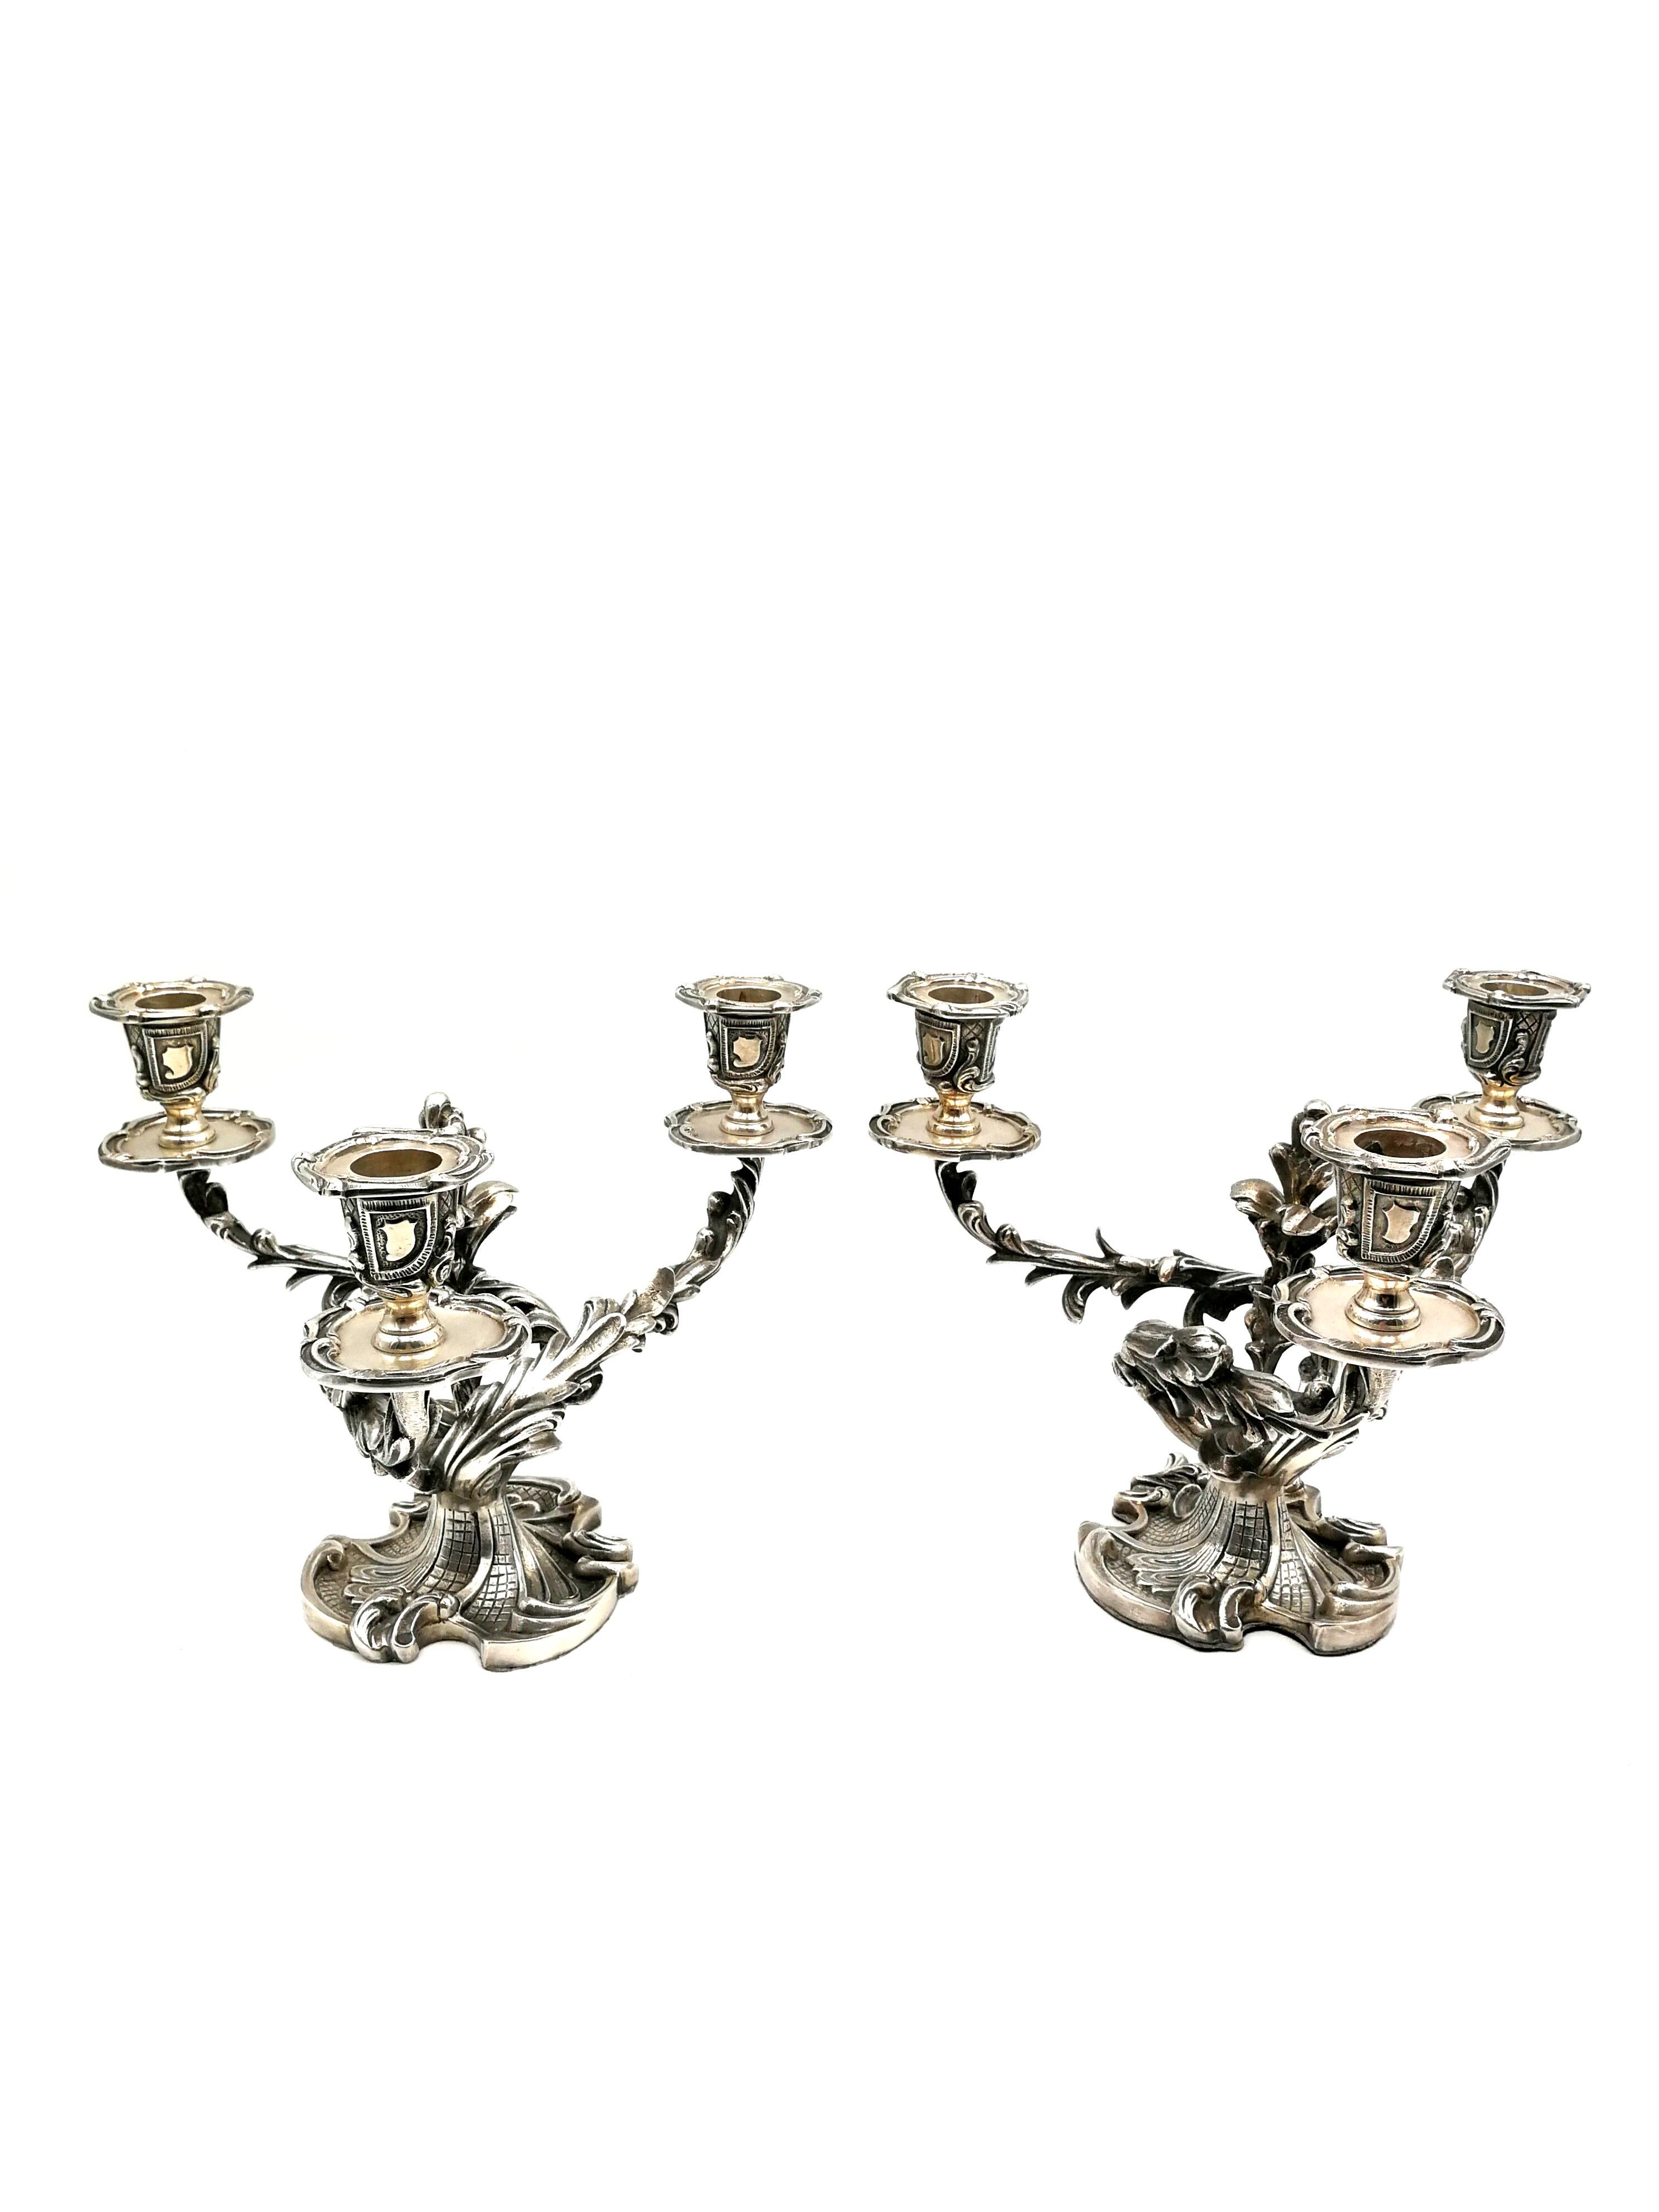 Wiskeman Pair of Rococo Silver Plated Candelabra 7